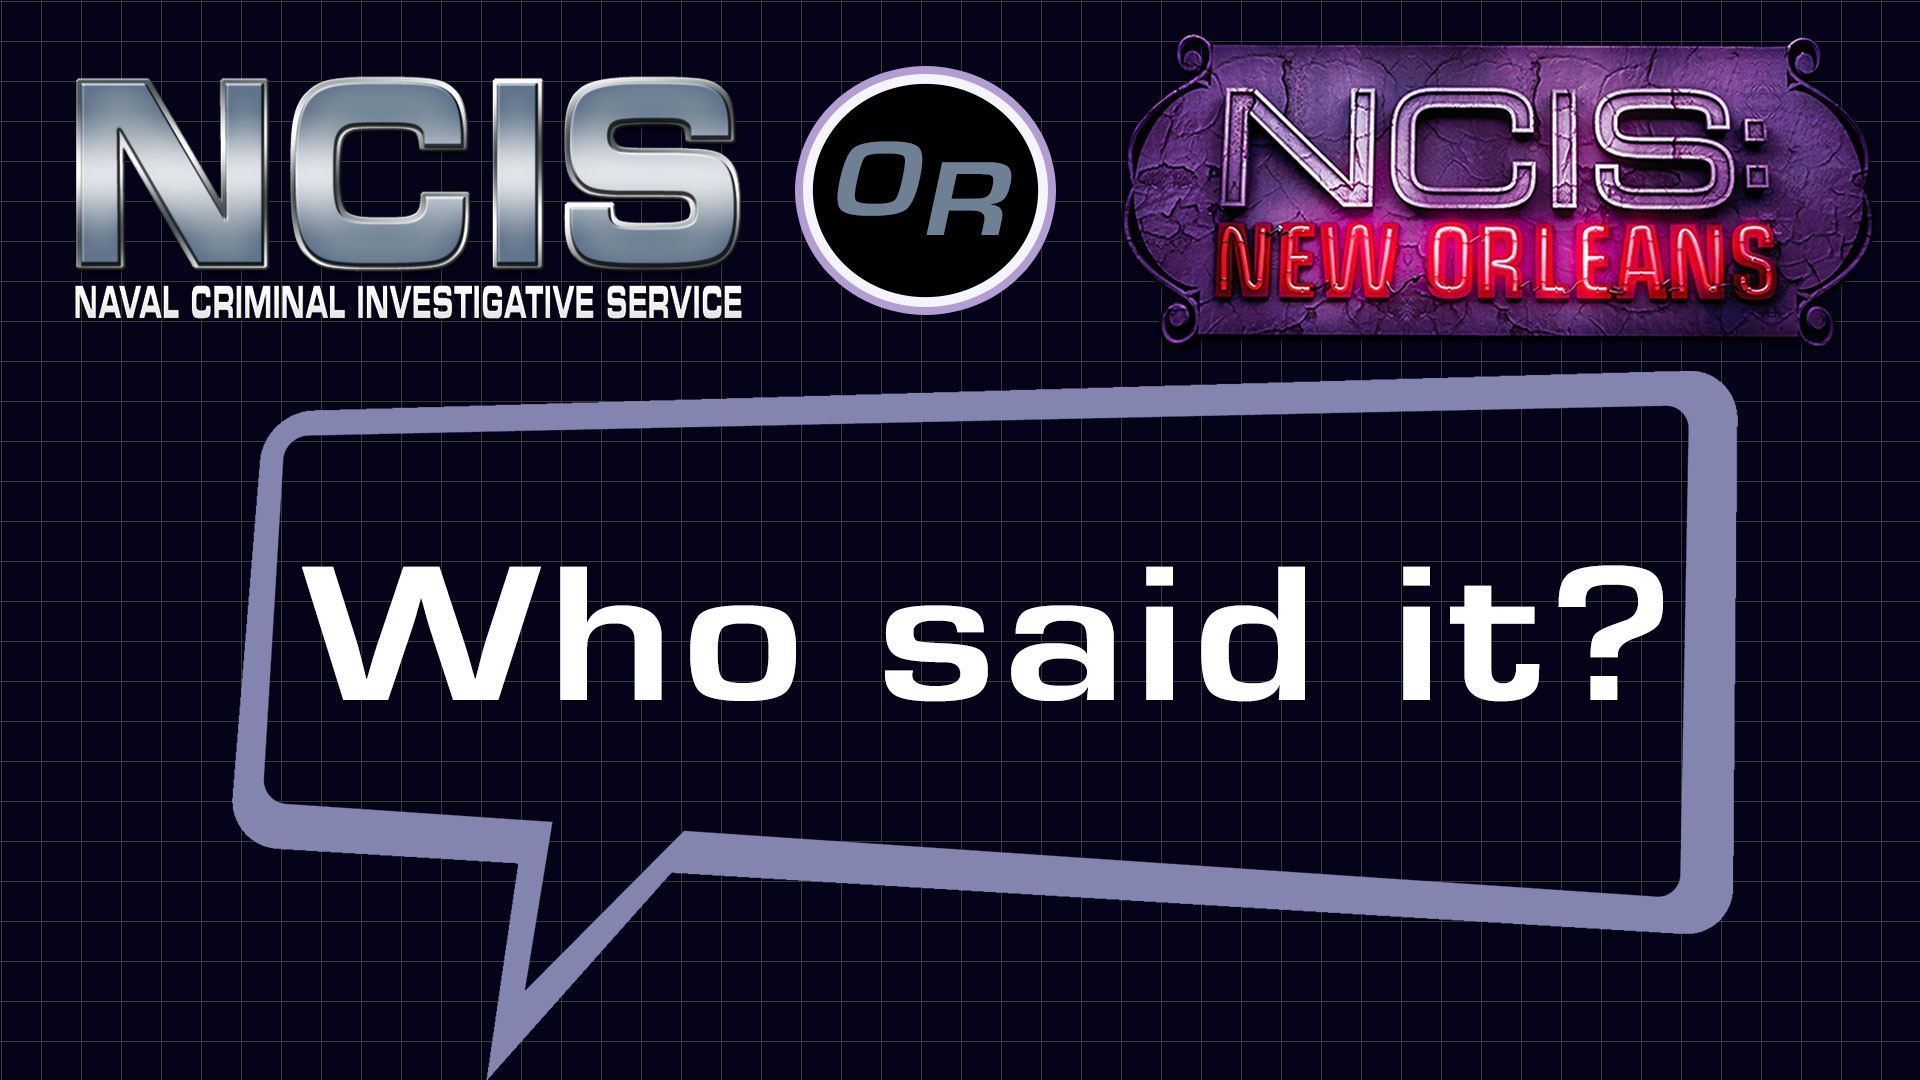 NCIS or NCIS: New Orleans?